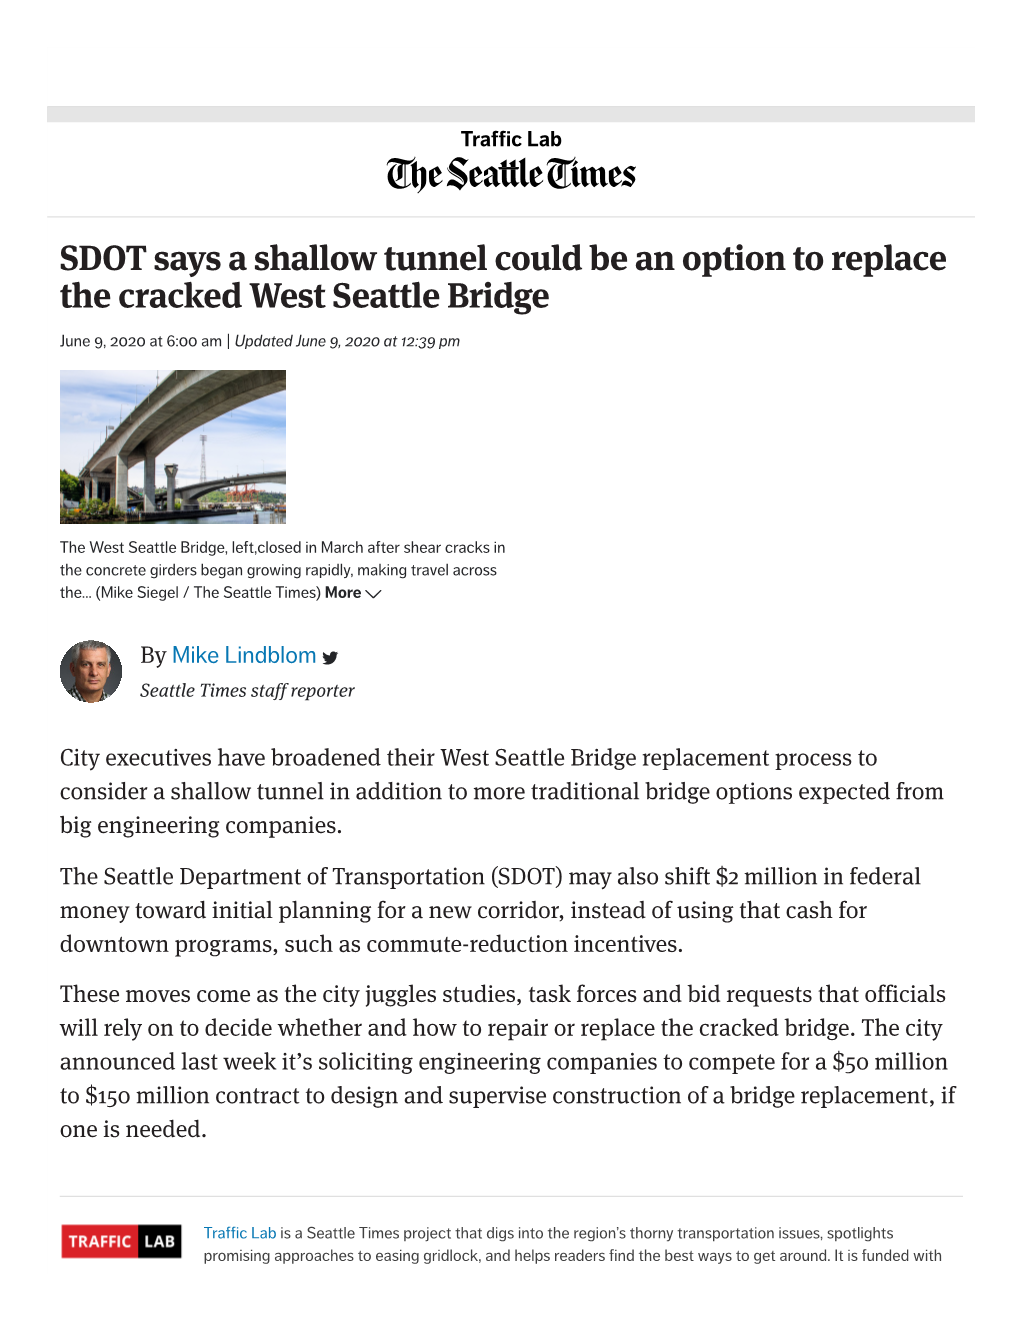 SDOT Says a Shallow Tunnel Could Be an Option to Replace the Cracked West Seattle Bridge